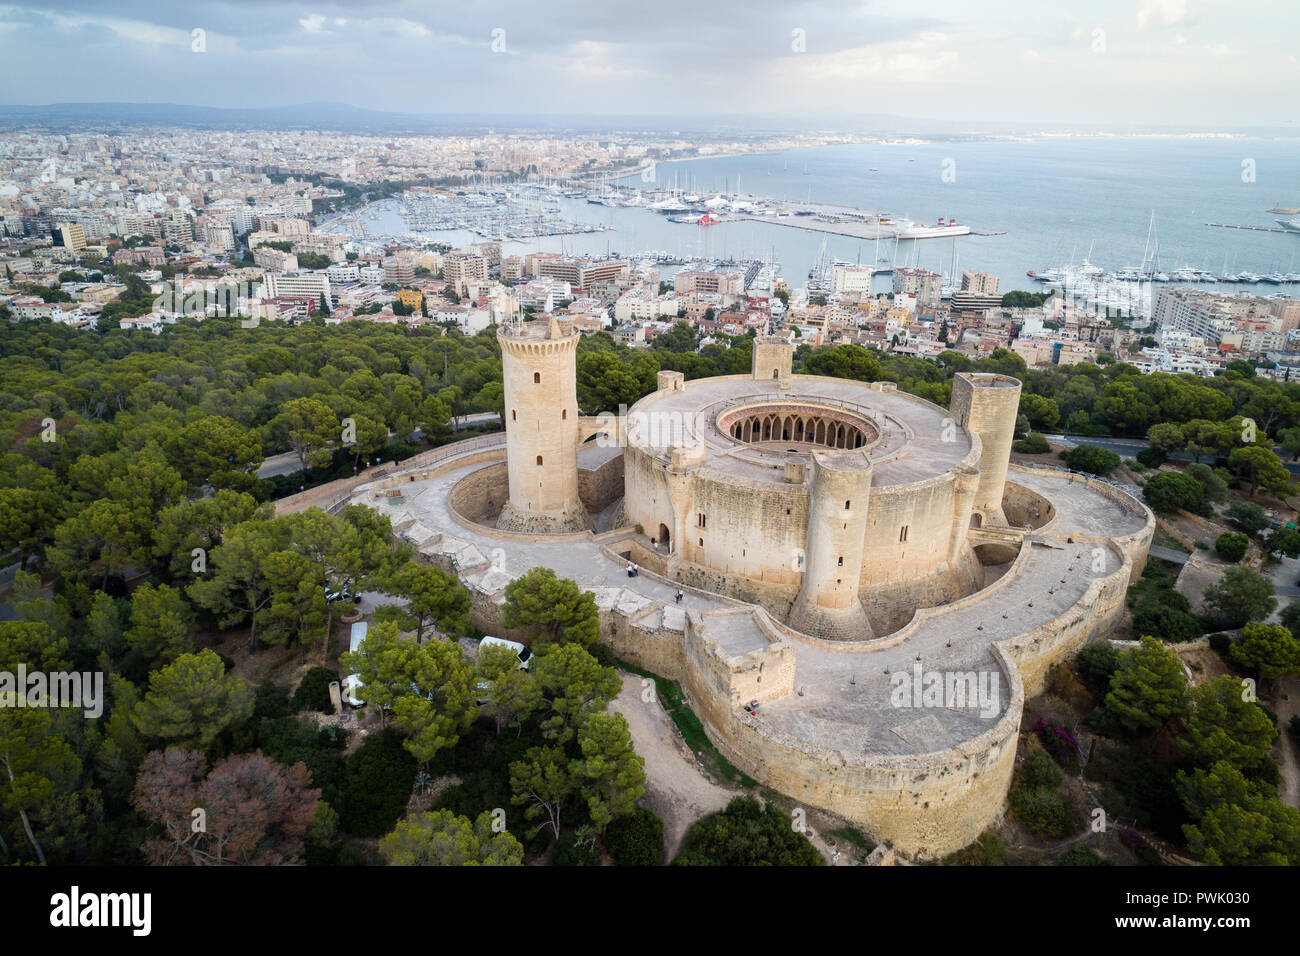 Aerial view of Bellver castle - medieval fortress in Palma de Mallorca, Balearic Islands, Spain Stock Photo